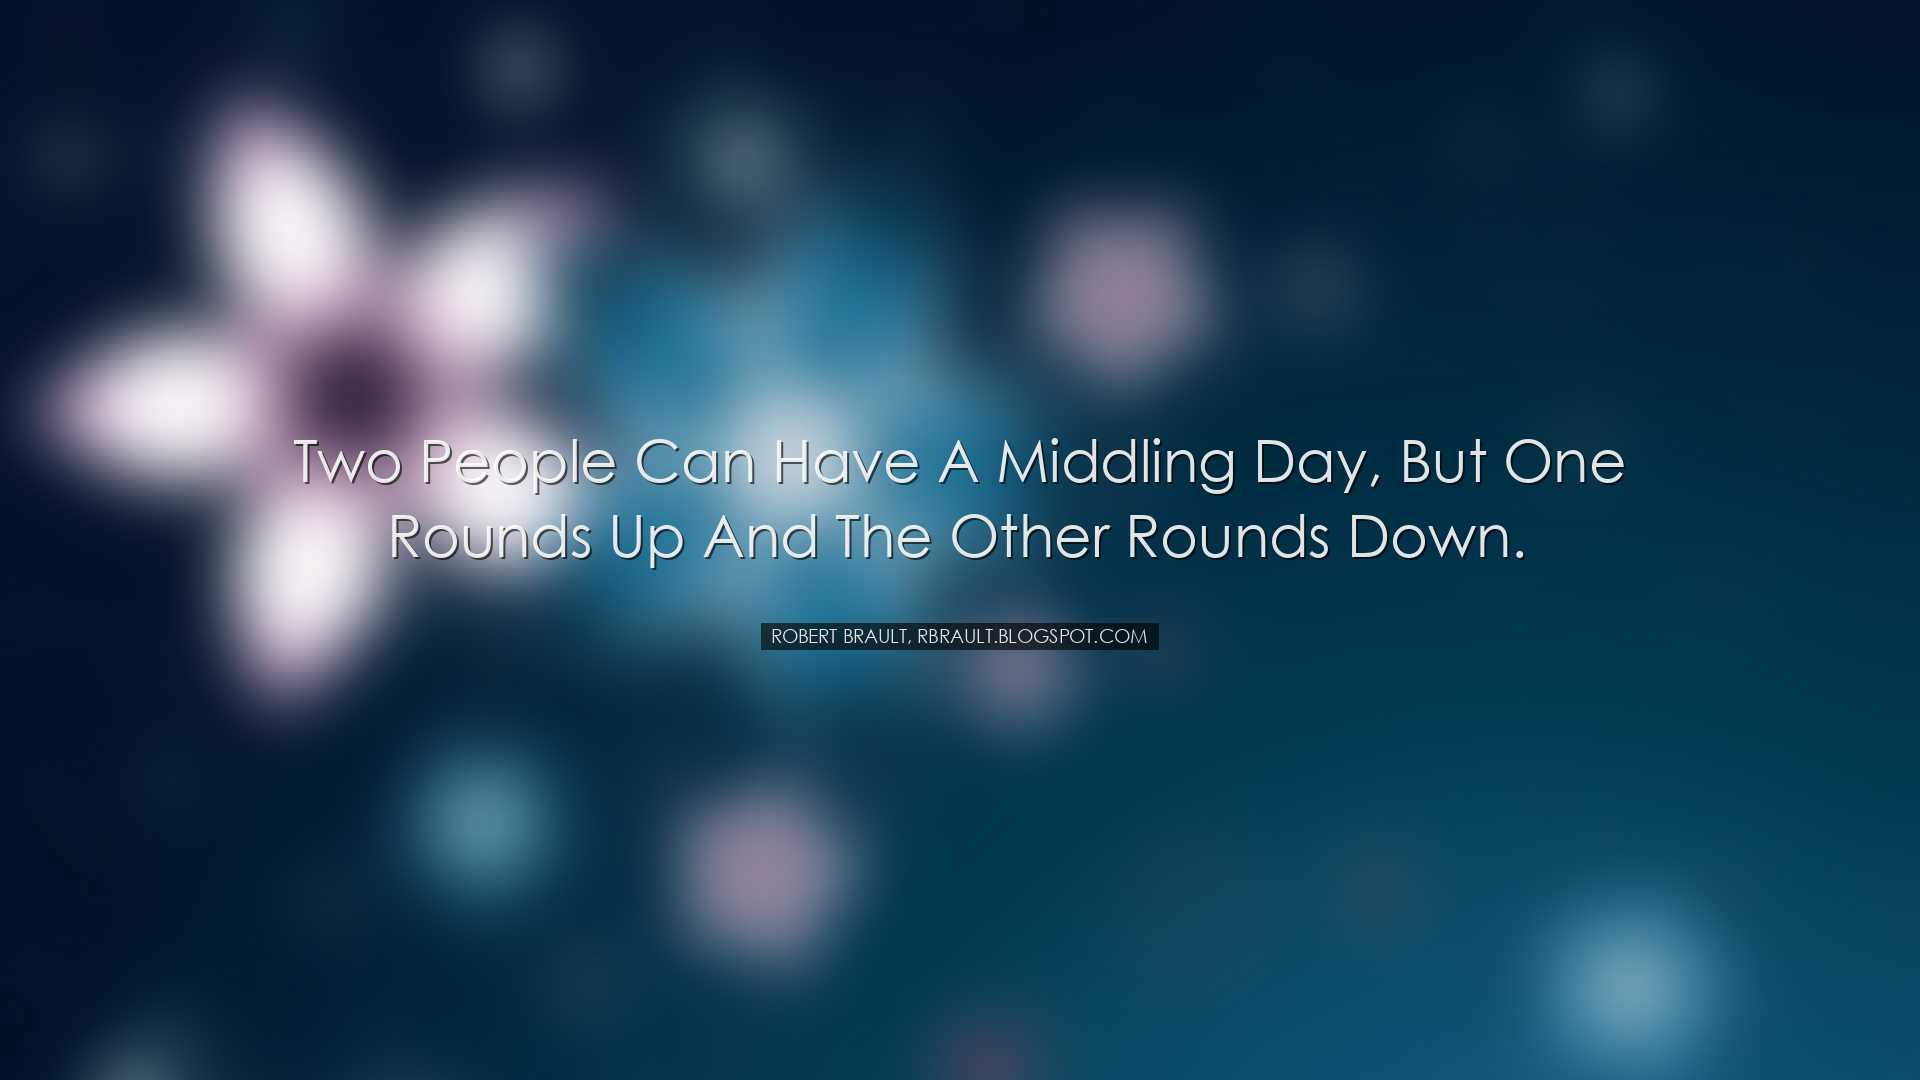 Two people can have a middling day, but one rounds up and the othe